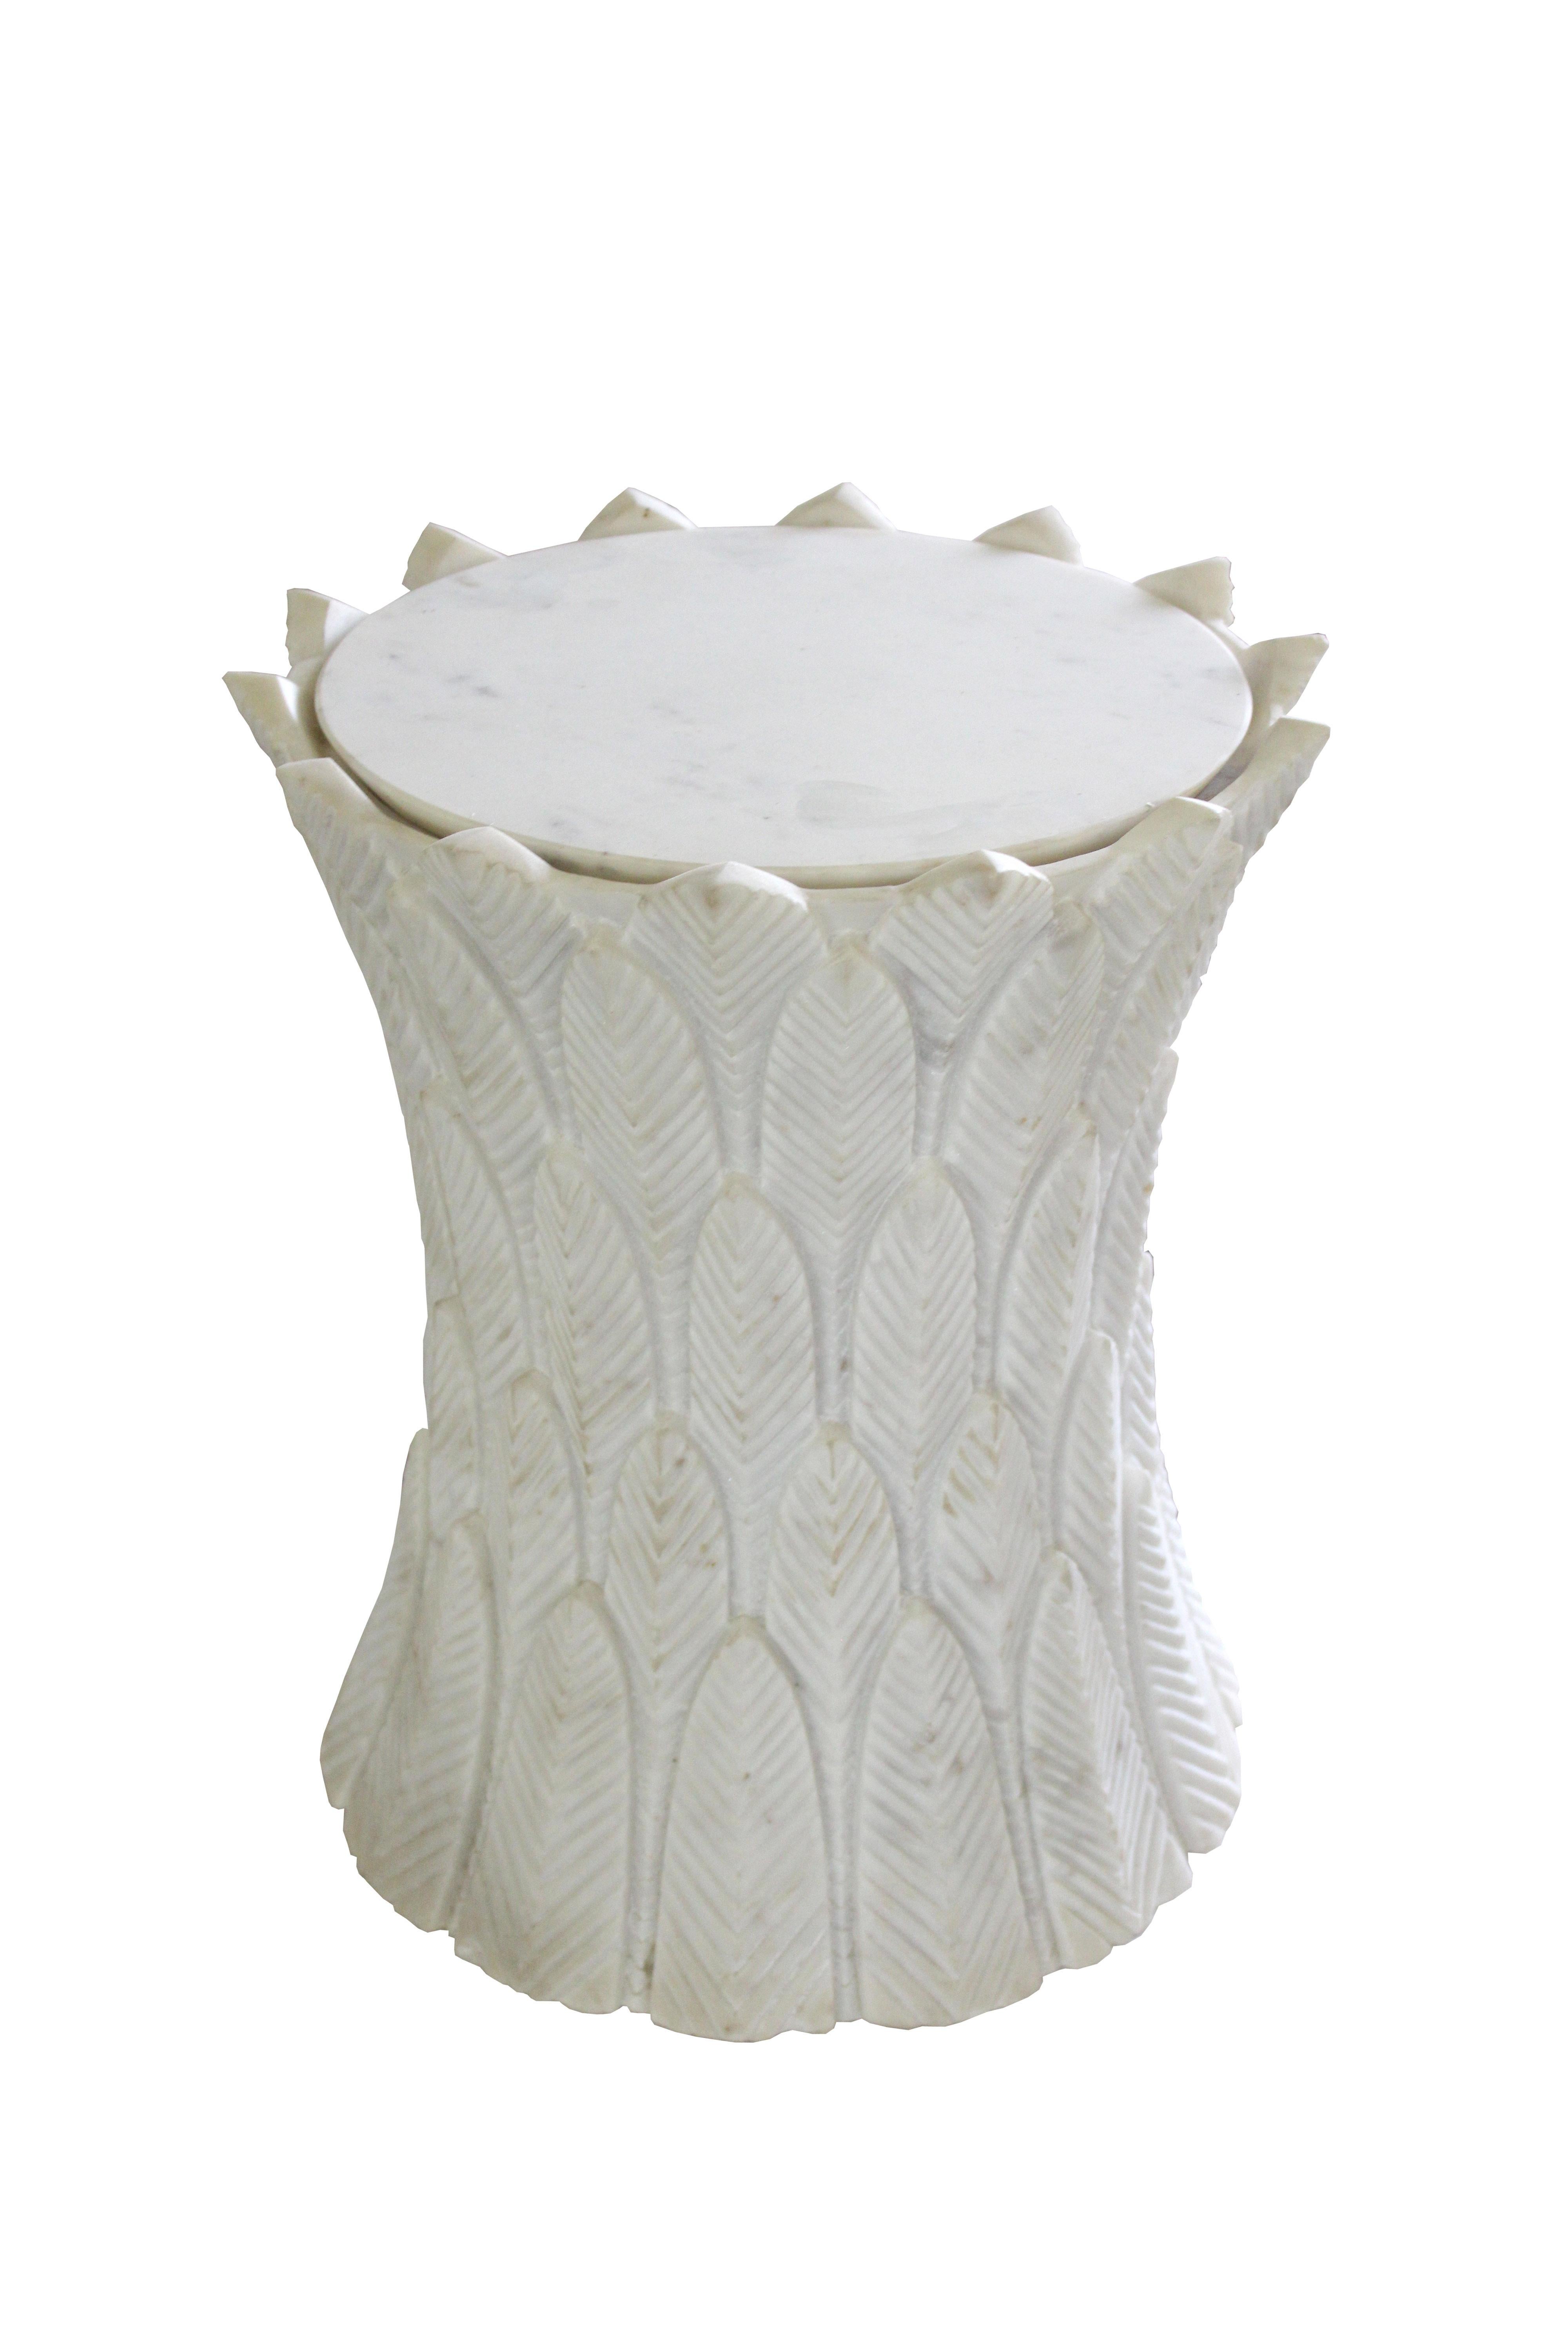 American Palm leaves Side Table in Agra White Marble by Stephanie Odegard For Sale